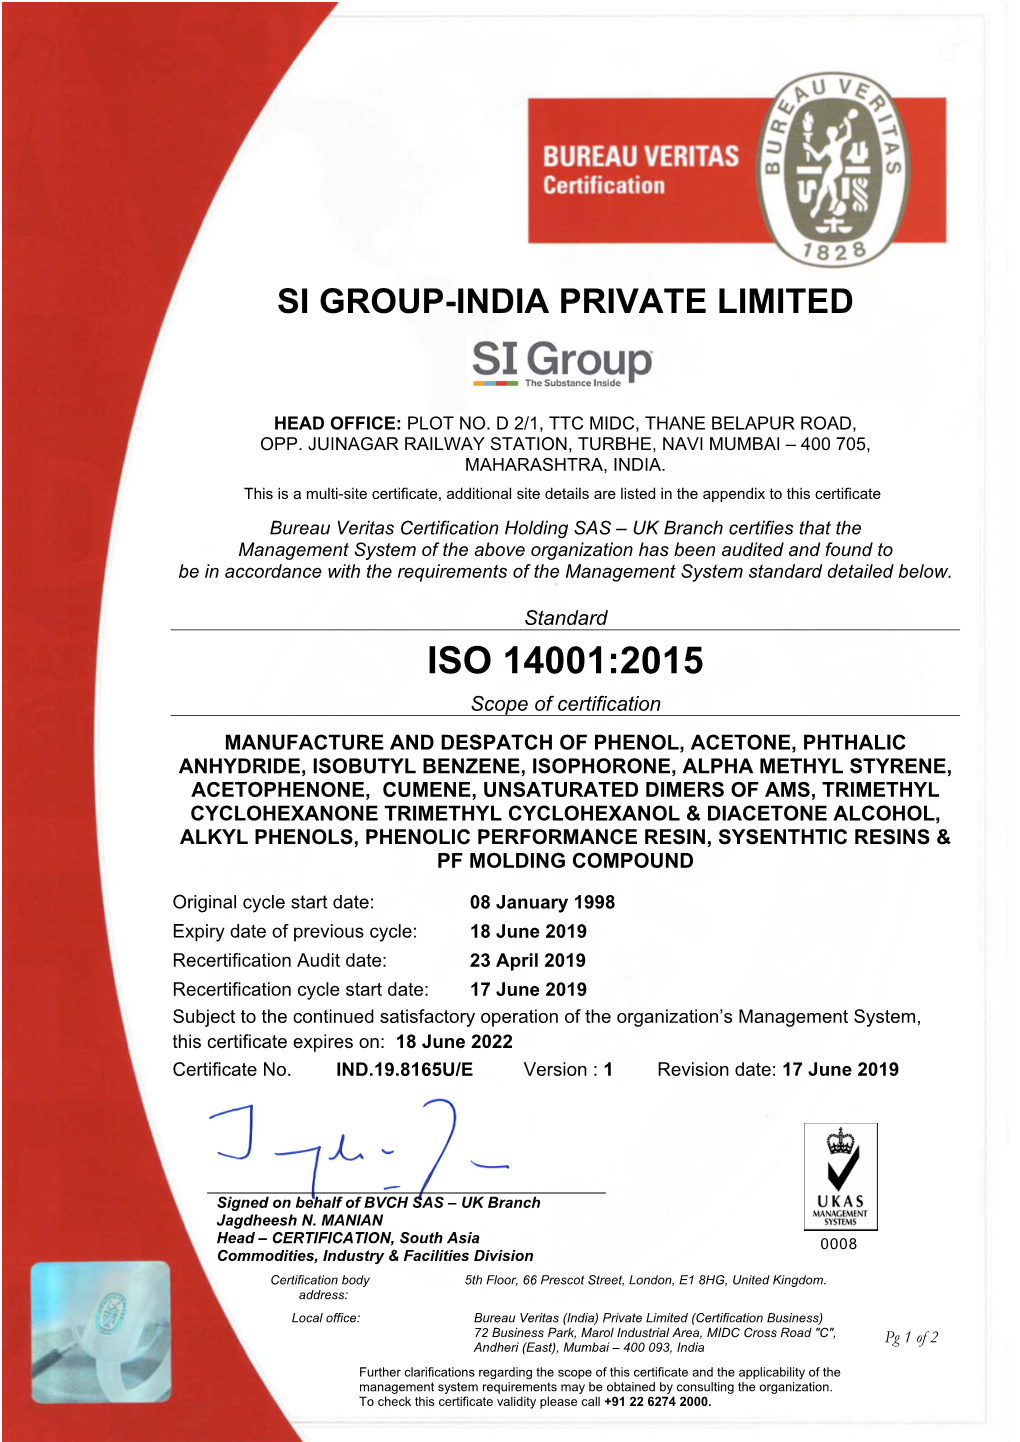 ISO 14001:2015 Scope of Certification